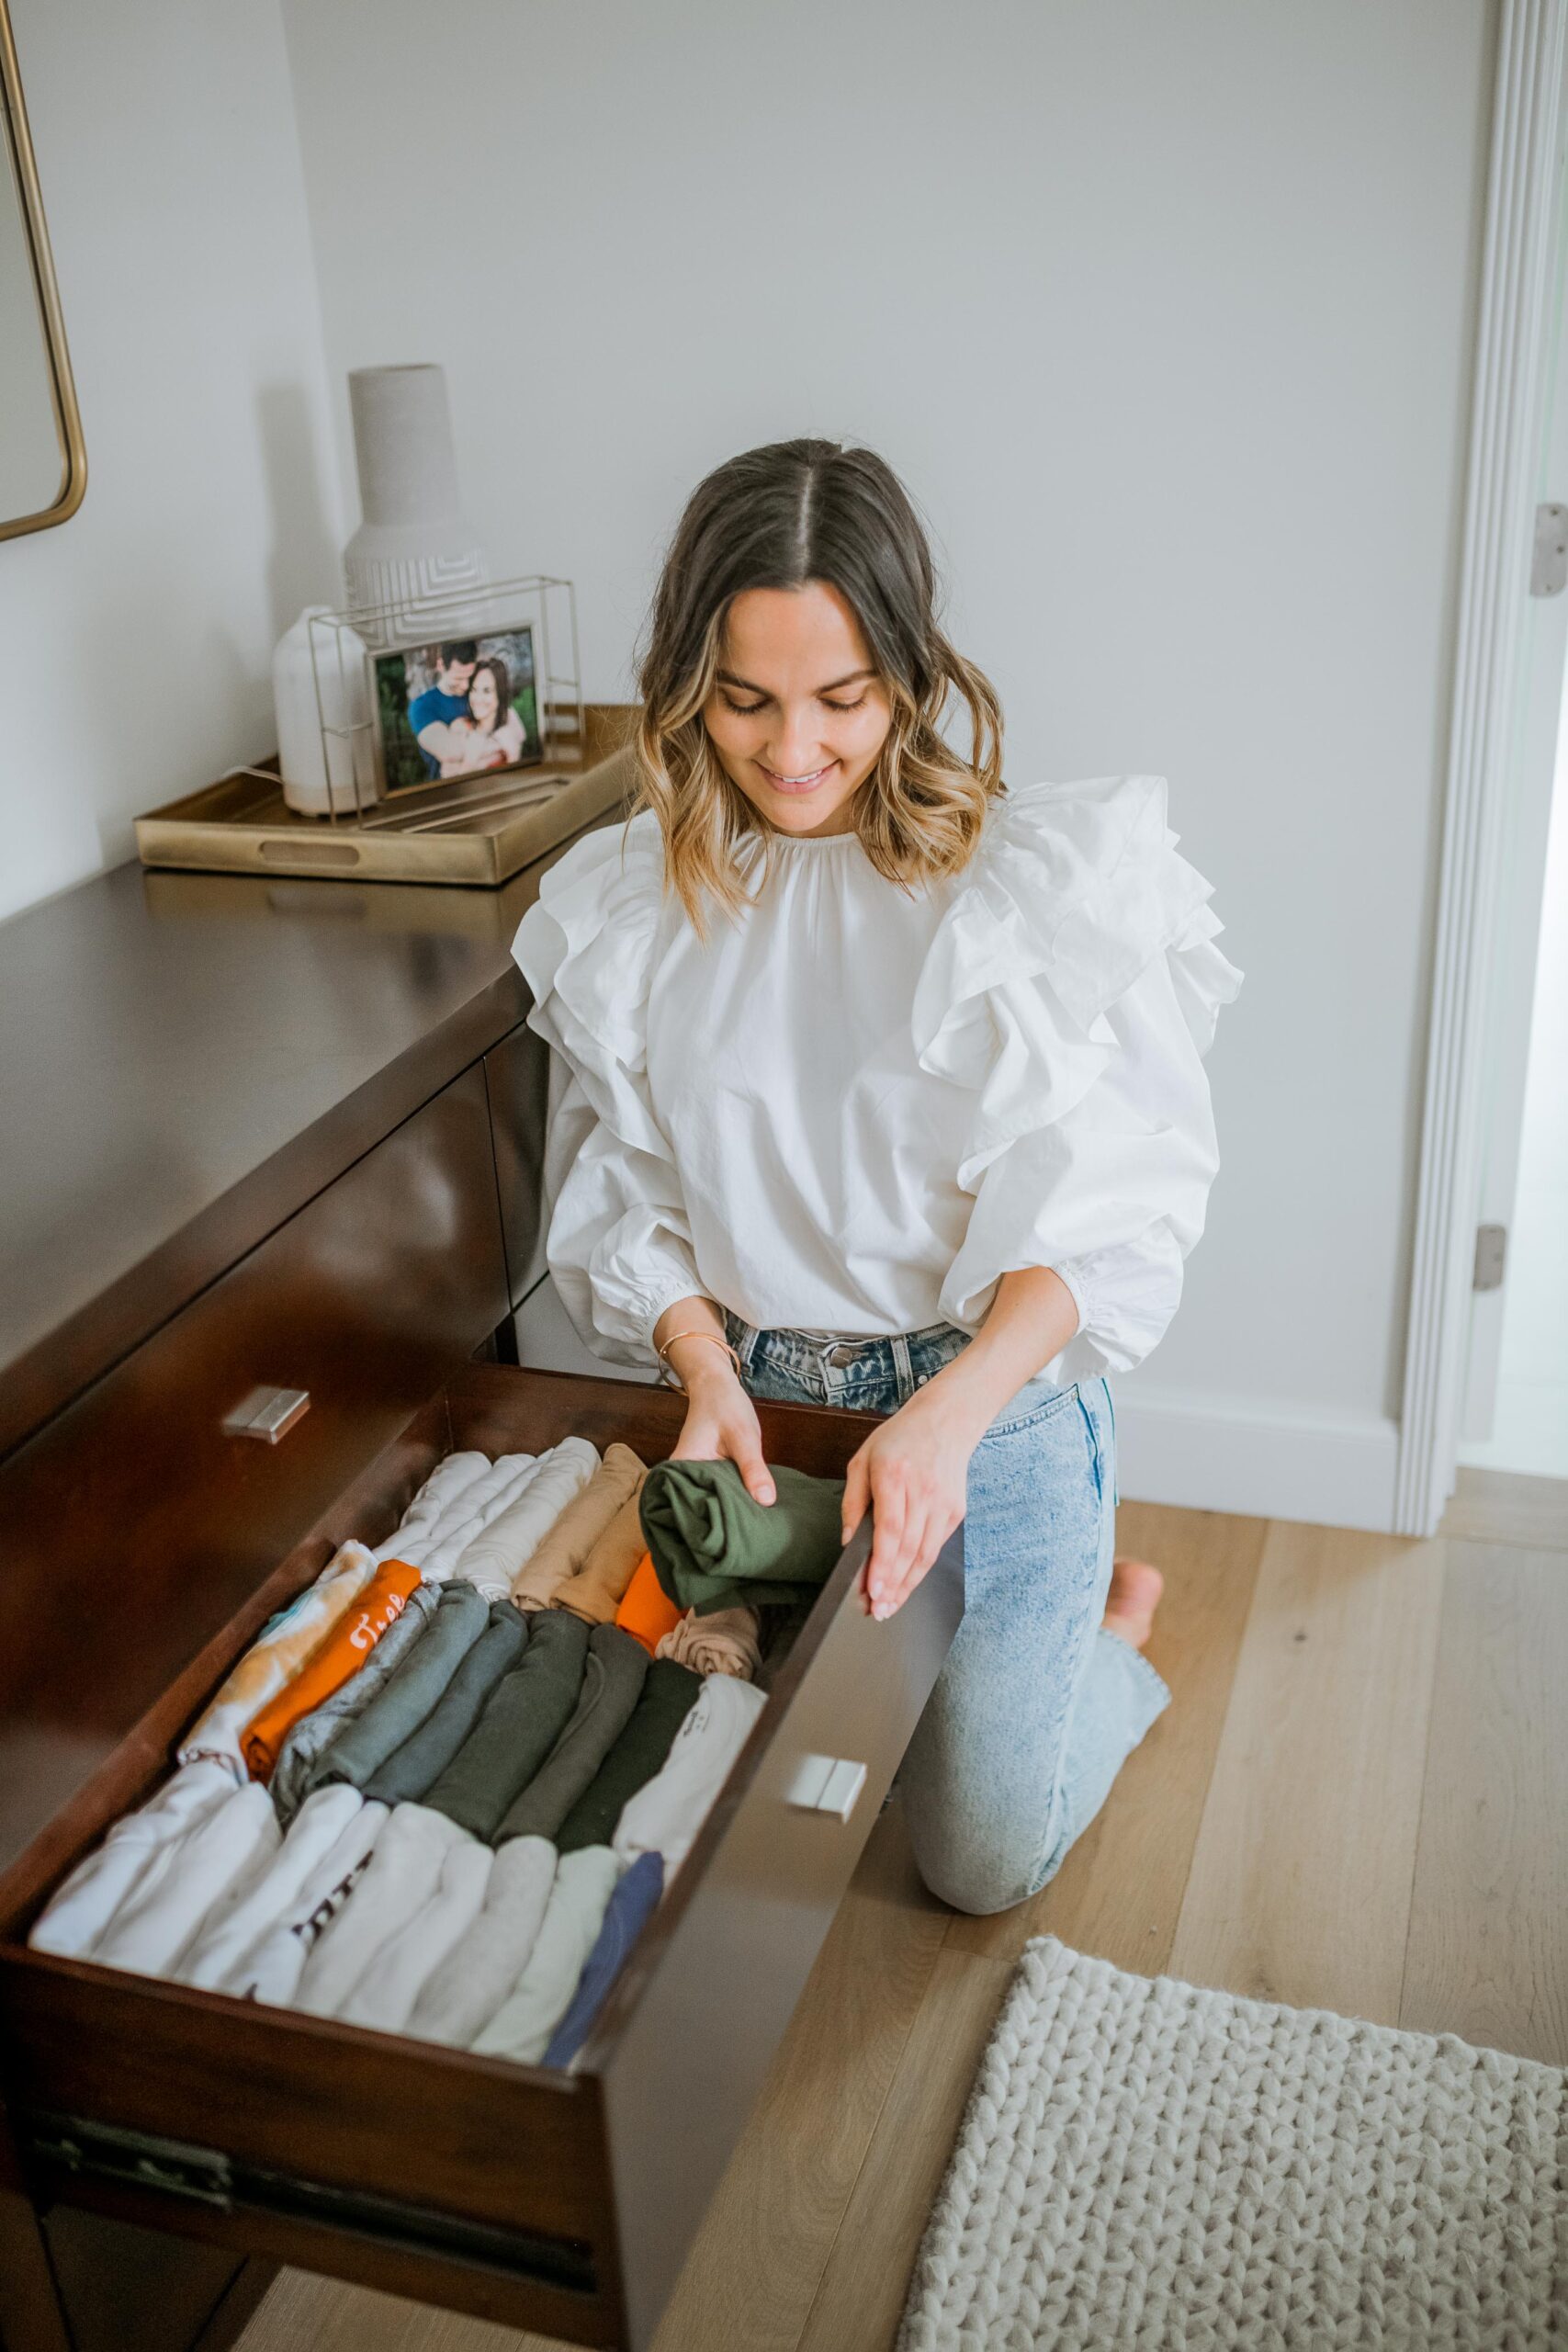 How To Marie Kondo Your Closet: 4 Tips for Getting Started